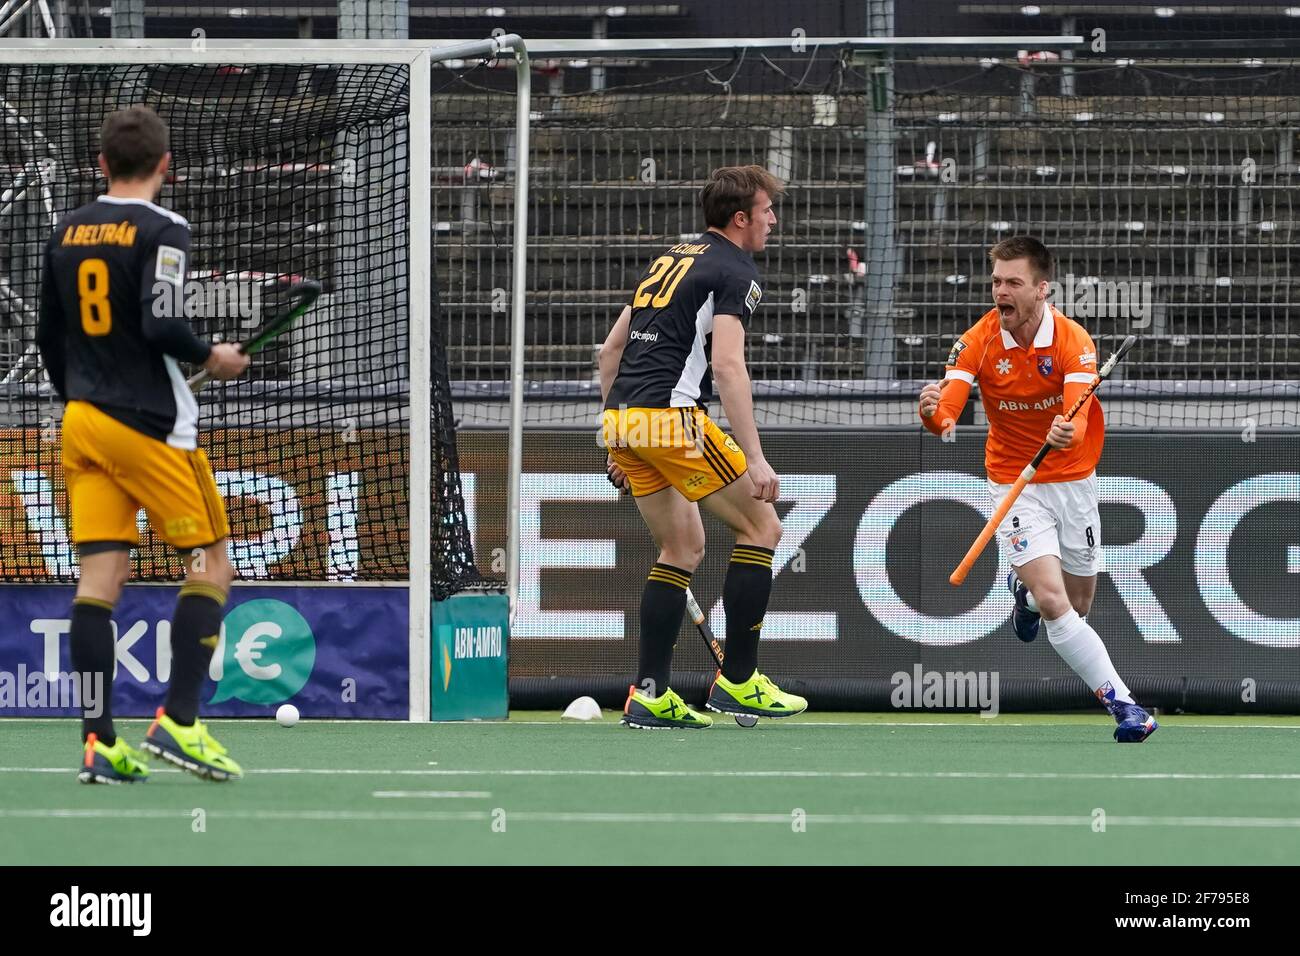 AMSTELVEEN, NETHERLANDS - APRIL 5: Thierry Brinkman of Bloemendaal celebrates after scoring his sides second goal during the Euro Hockey League Final Stock Photo